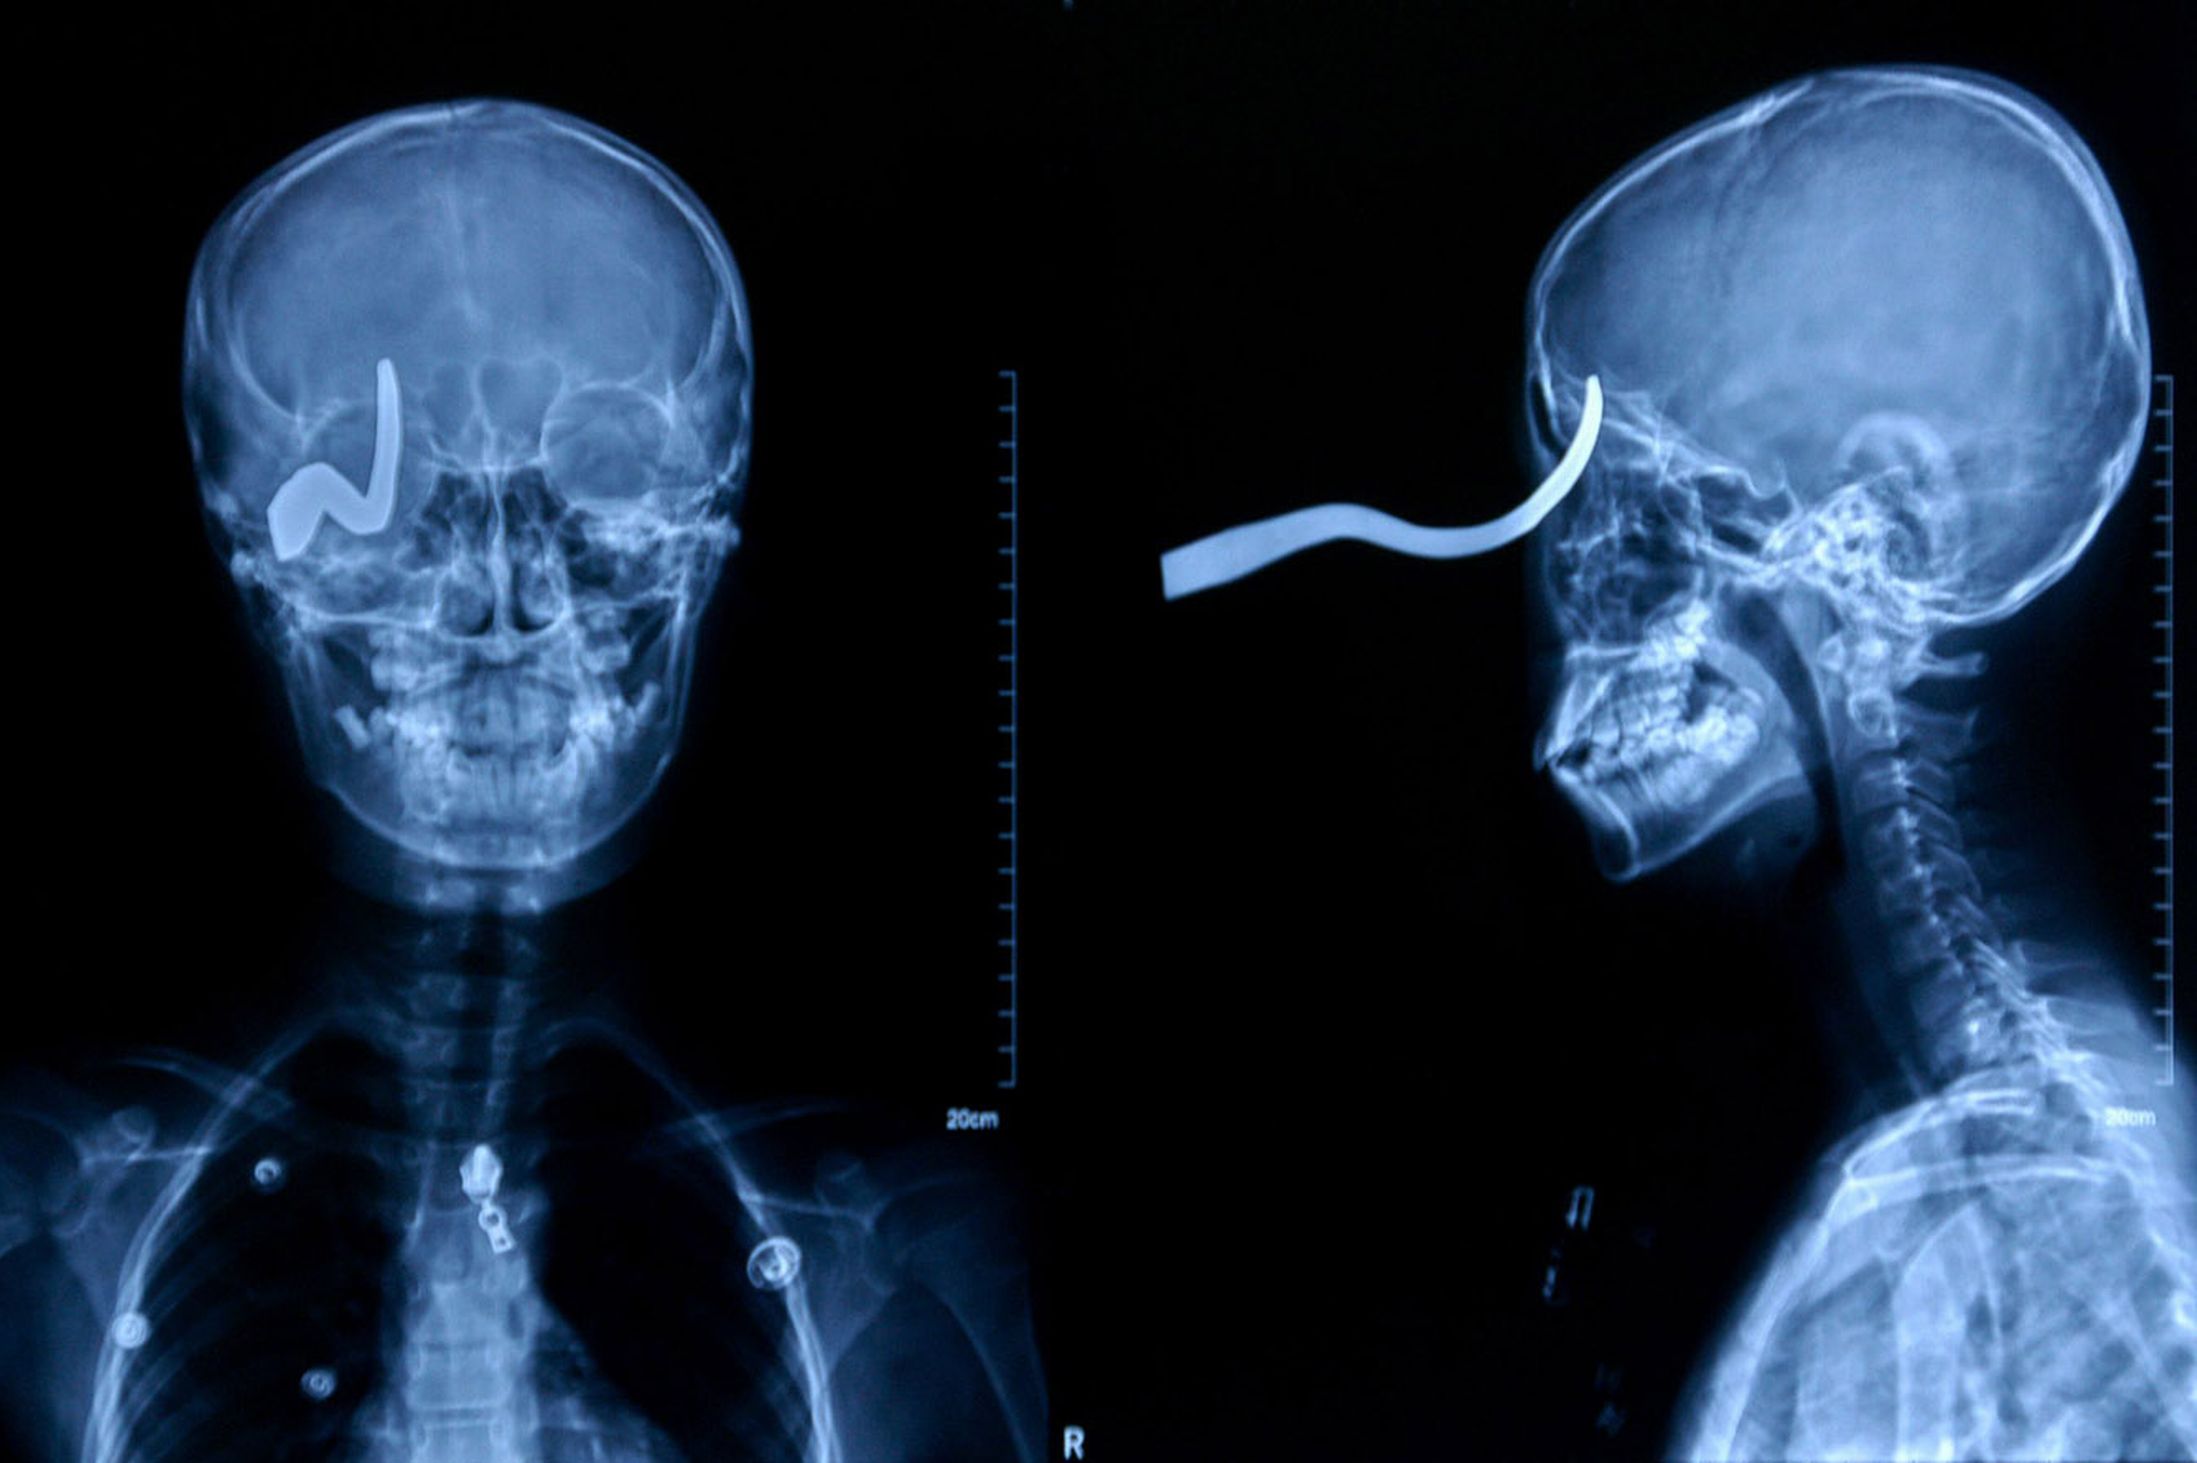 A 13-year-old slipped on an icy school floor in China. Xiao Lin fell forward onto a hook which embedded in his eye. A school handyman sawed the hook off the wall to free the lad, leaving 5cm sticking out of his head. Surgeon Yan Shijun commented: "The hook pierced his skull but was turned to the side by the impact. Any movement would have sent it into his brain and he could have died on the spot." He added: "He has lost his right eye but he's very lucky to be alive at all."